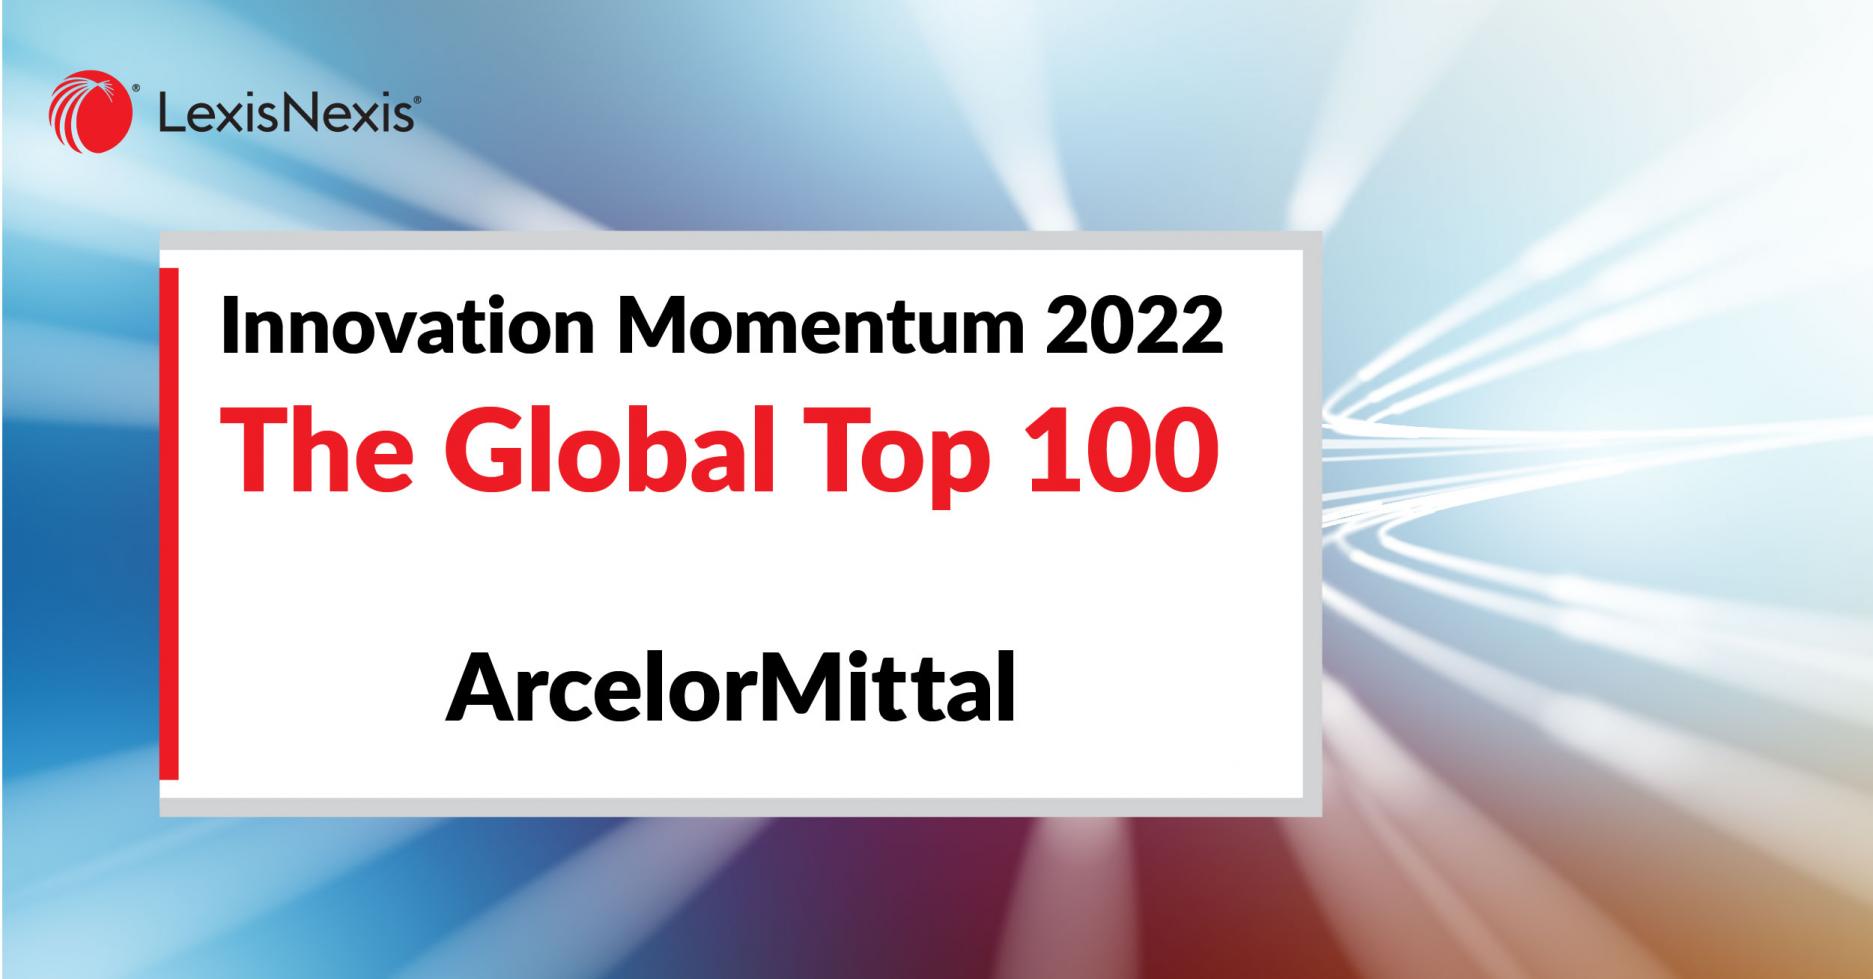 The Global Top 100 Innovator announcement